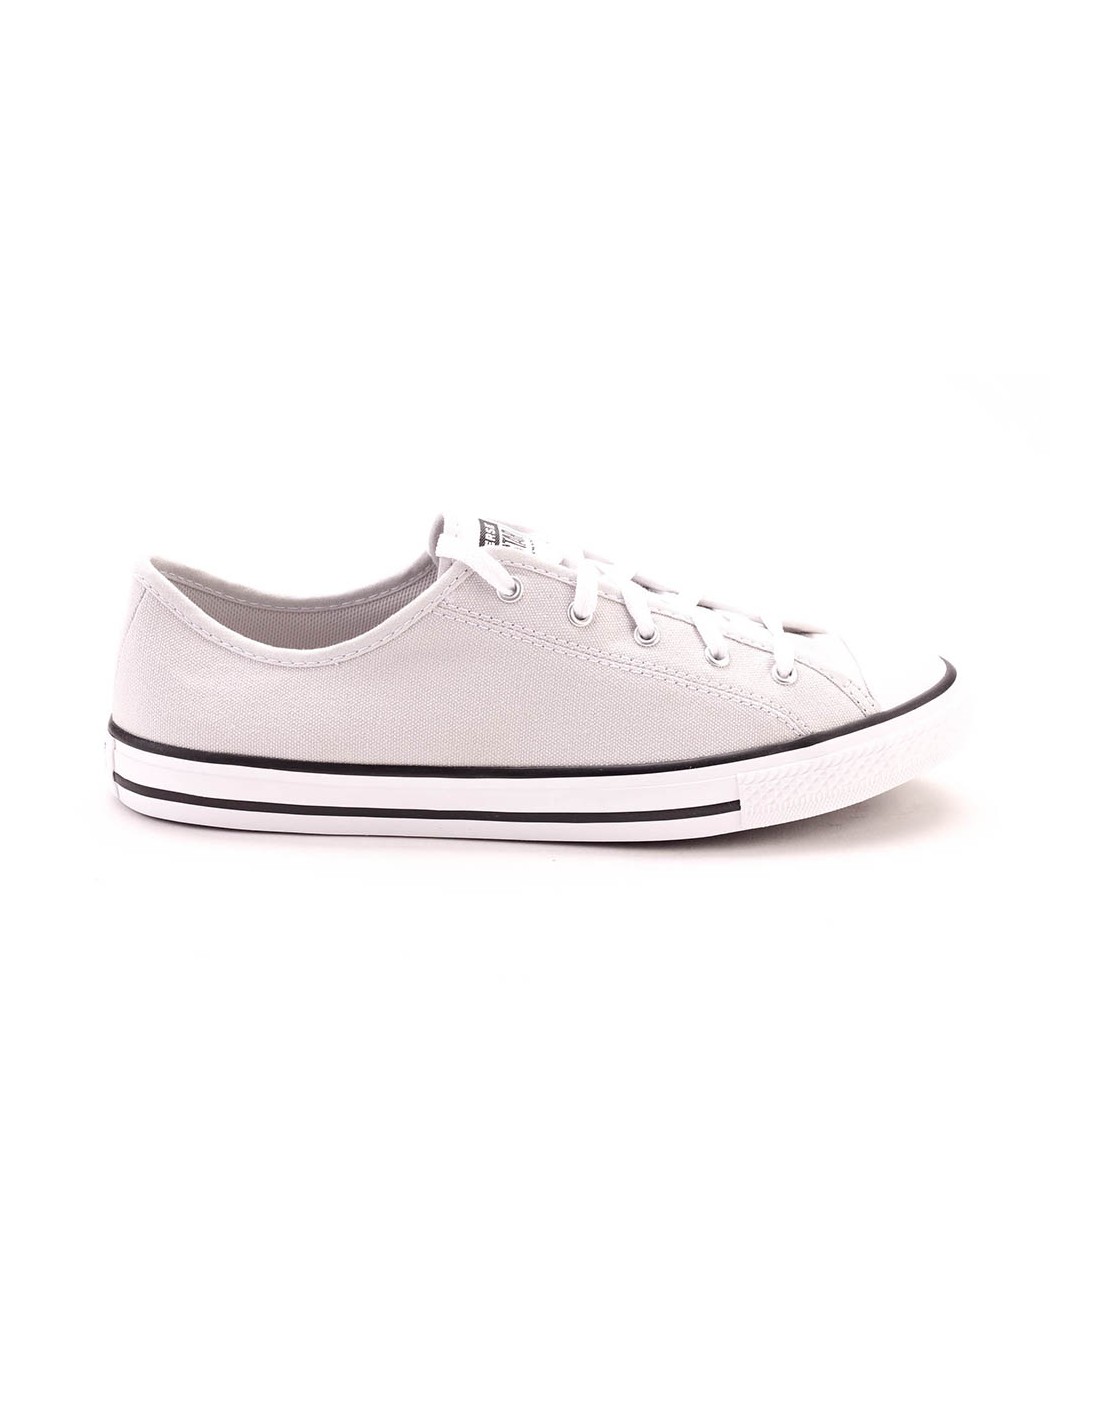 CONVERSE All Star Dainty OX Sneakers